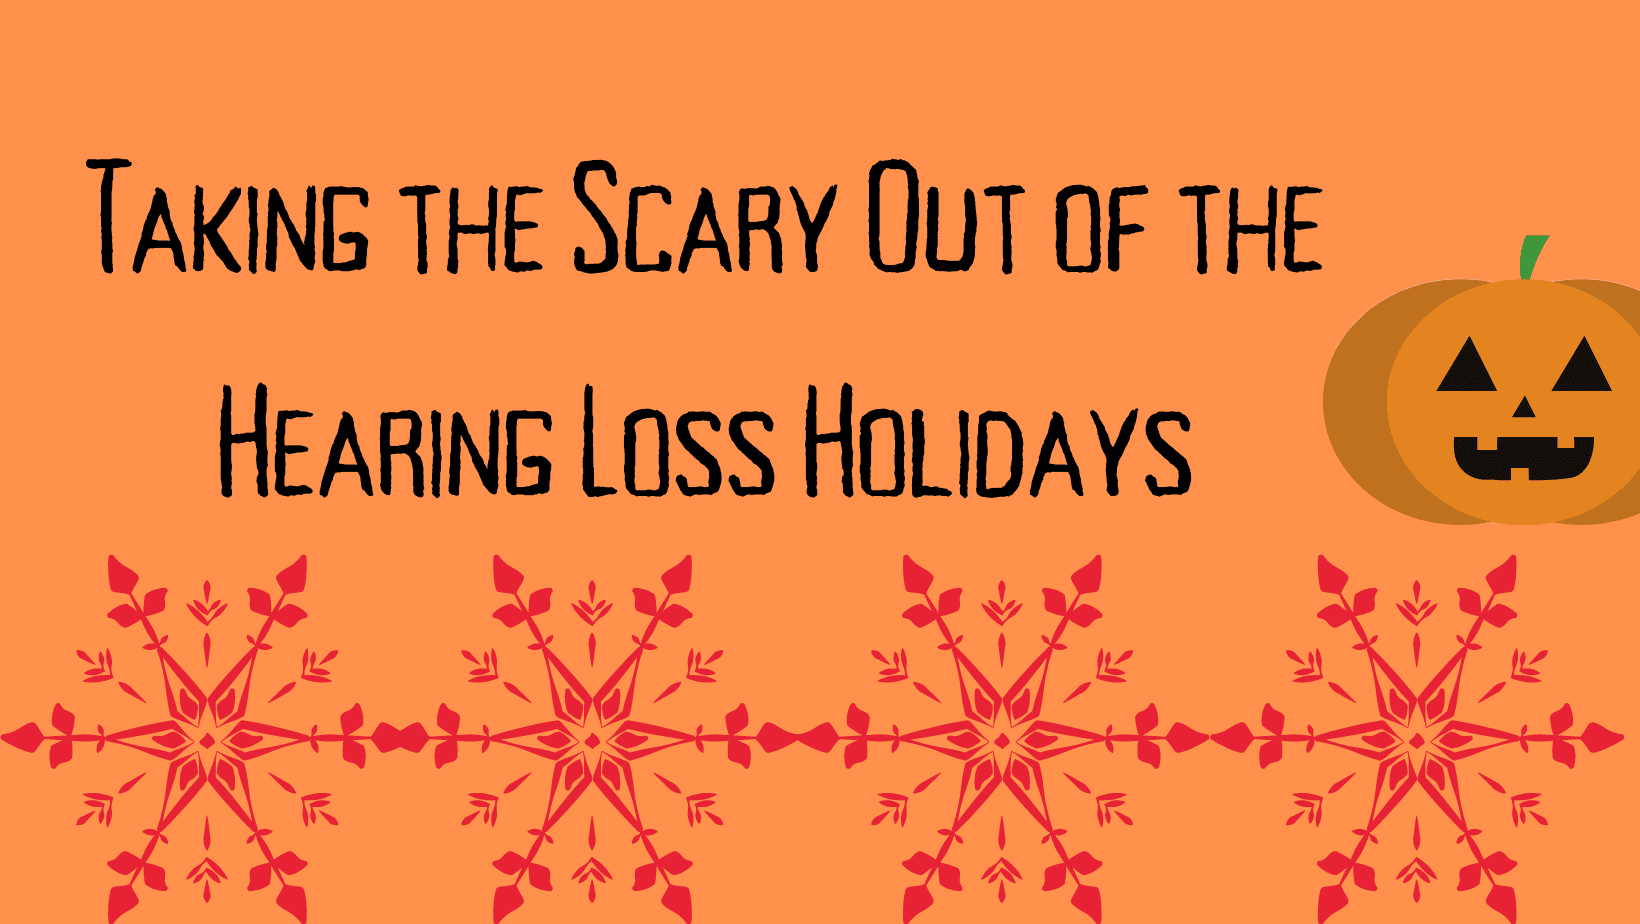 Featured image for “Taking the Scary Out of the Hearing Loss Holidays”